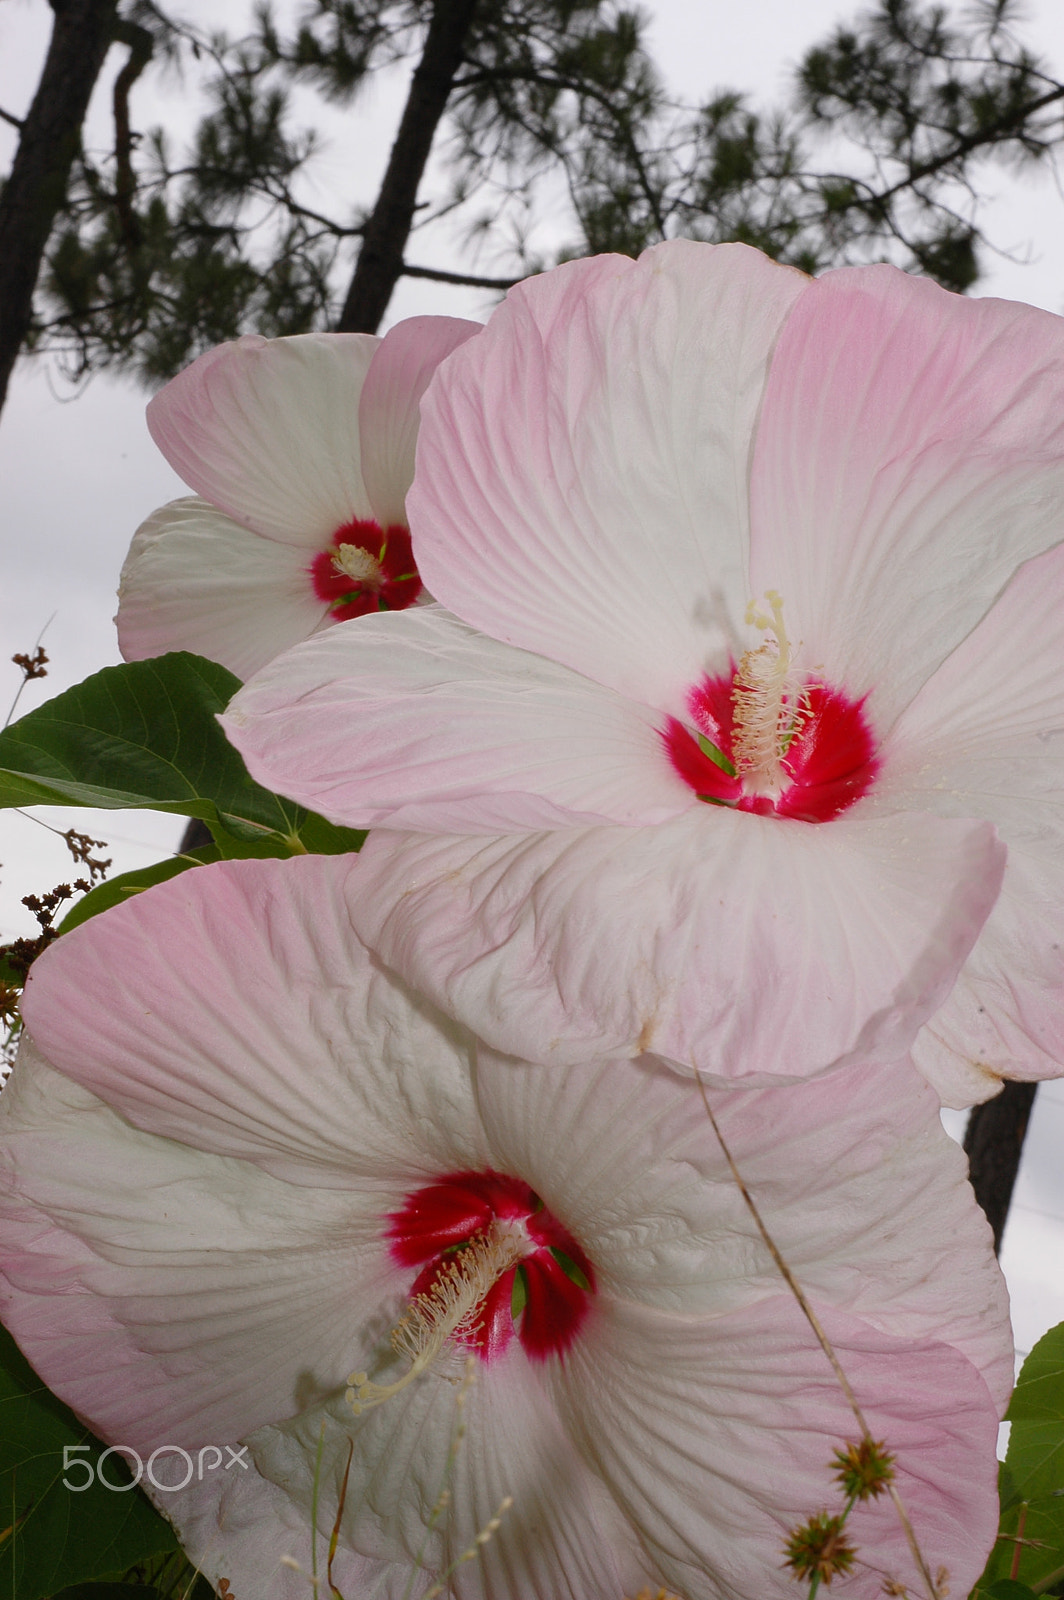 Nikon D70 sample photo. Stunning blooms in the summer photography